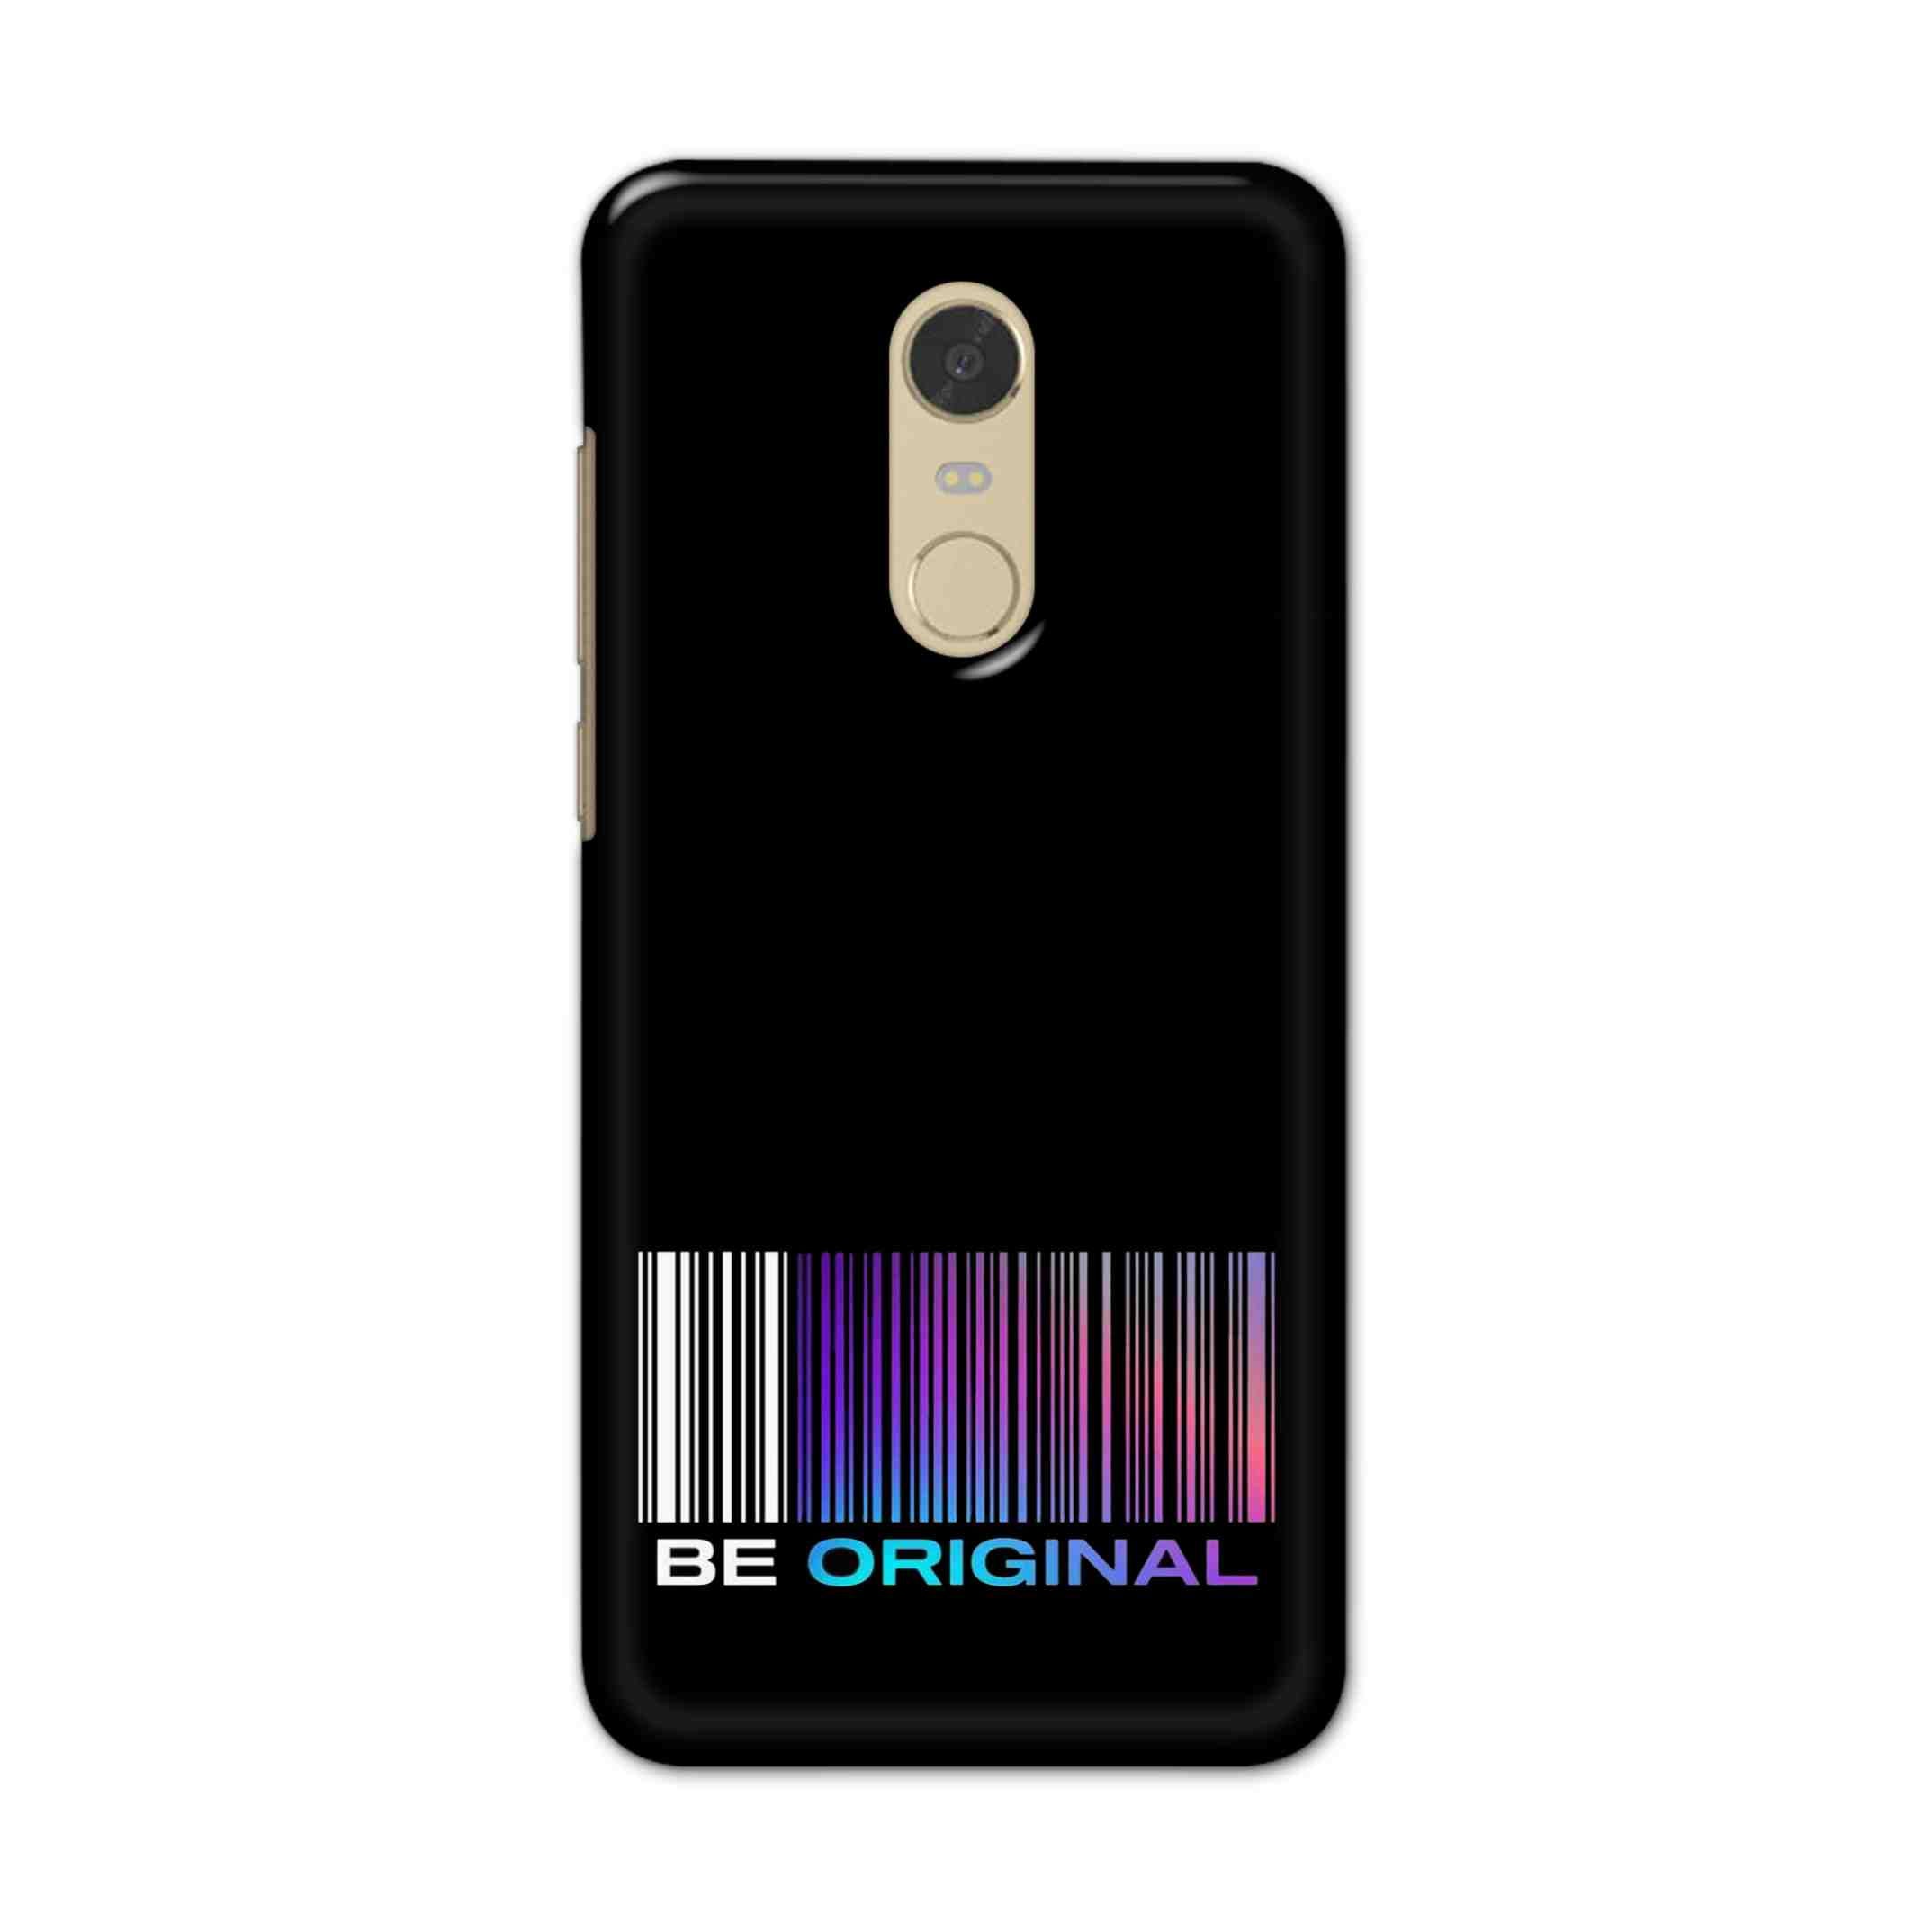 Buy Be Original Hard Back Mobile Phone Case/Cover For Redmi Note 6 Online